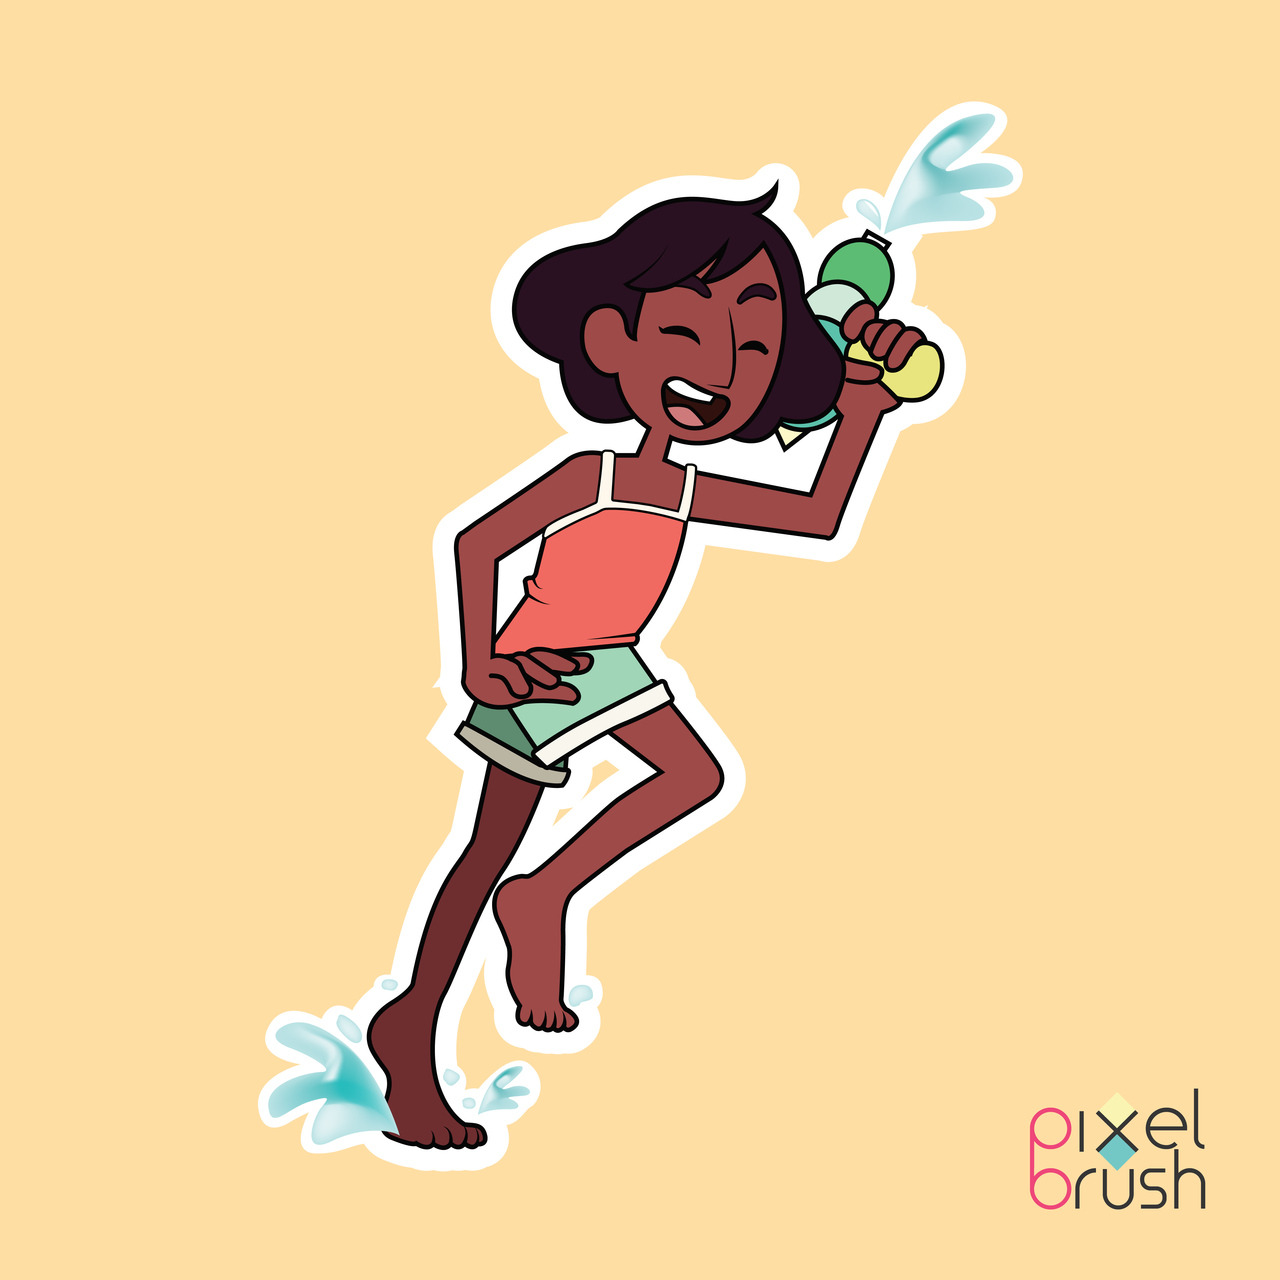 Connie will join the Steven Universe set too! Available soon. For more Steven Universe stickers visit my profile or my instagram!